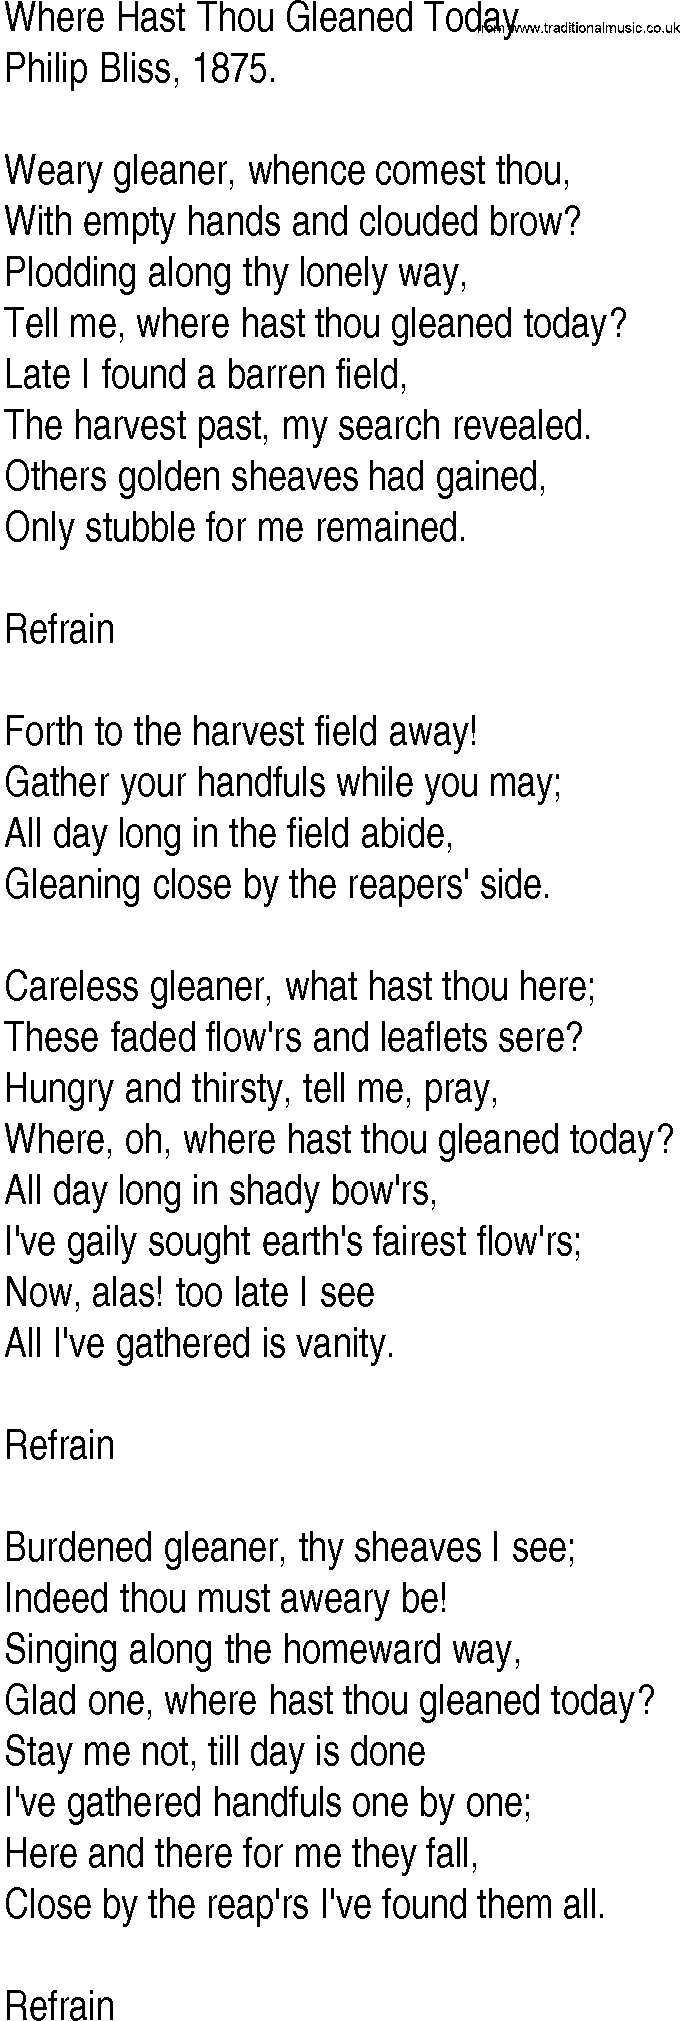 Hymn and Gospel Song: Where Hast Thou Gleaned Today by Philip Bliss lyrics